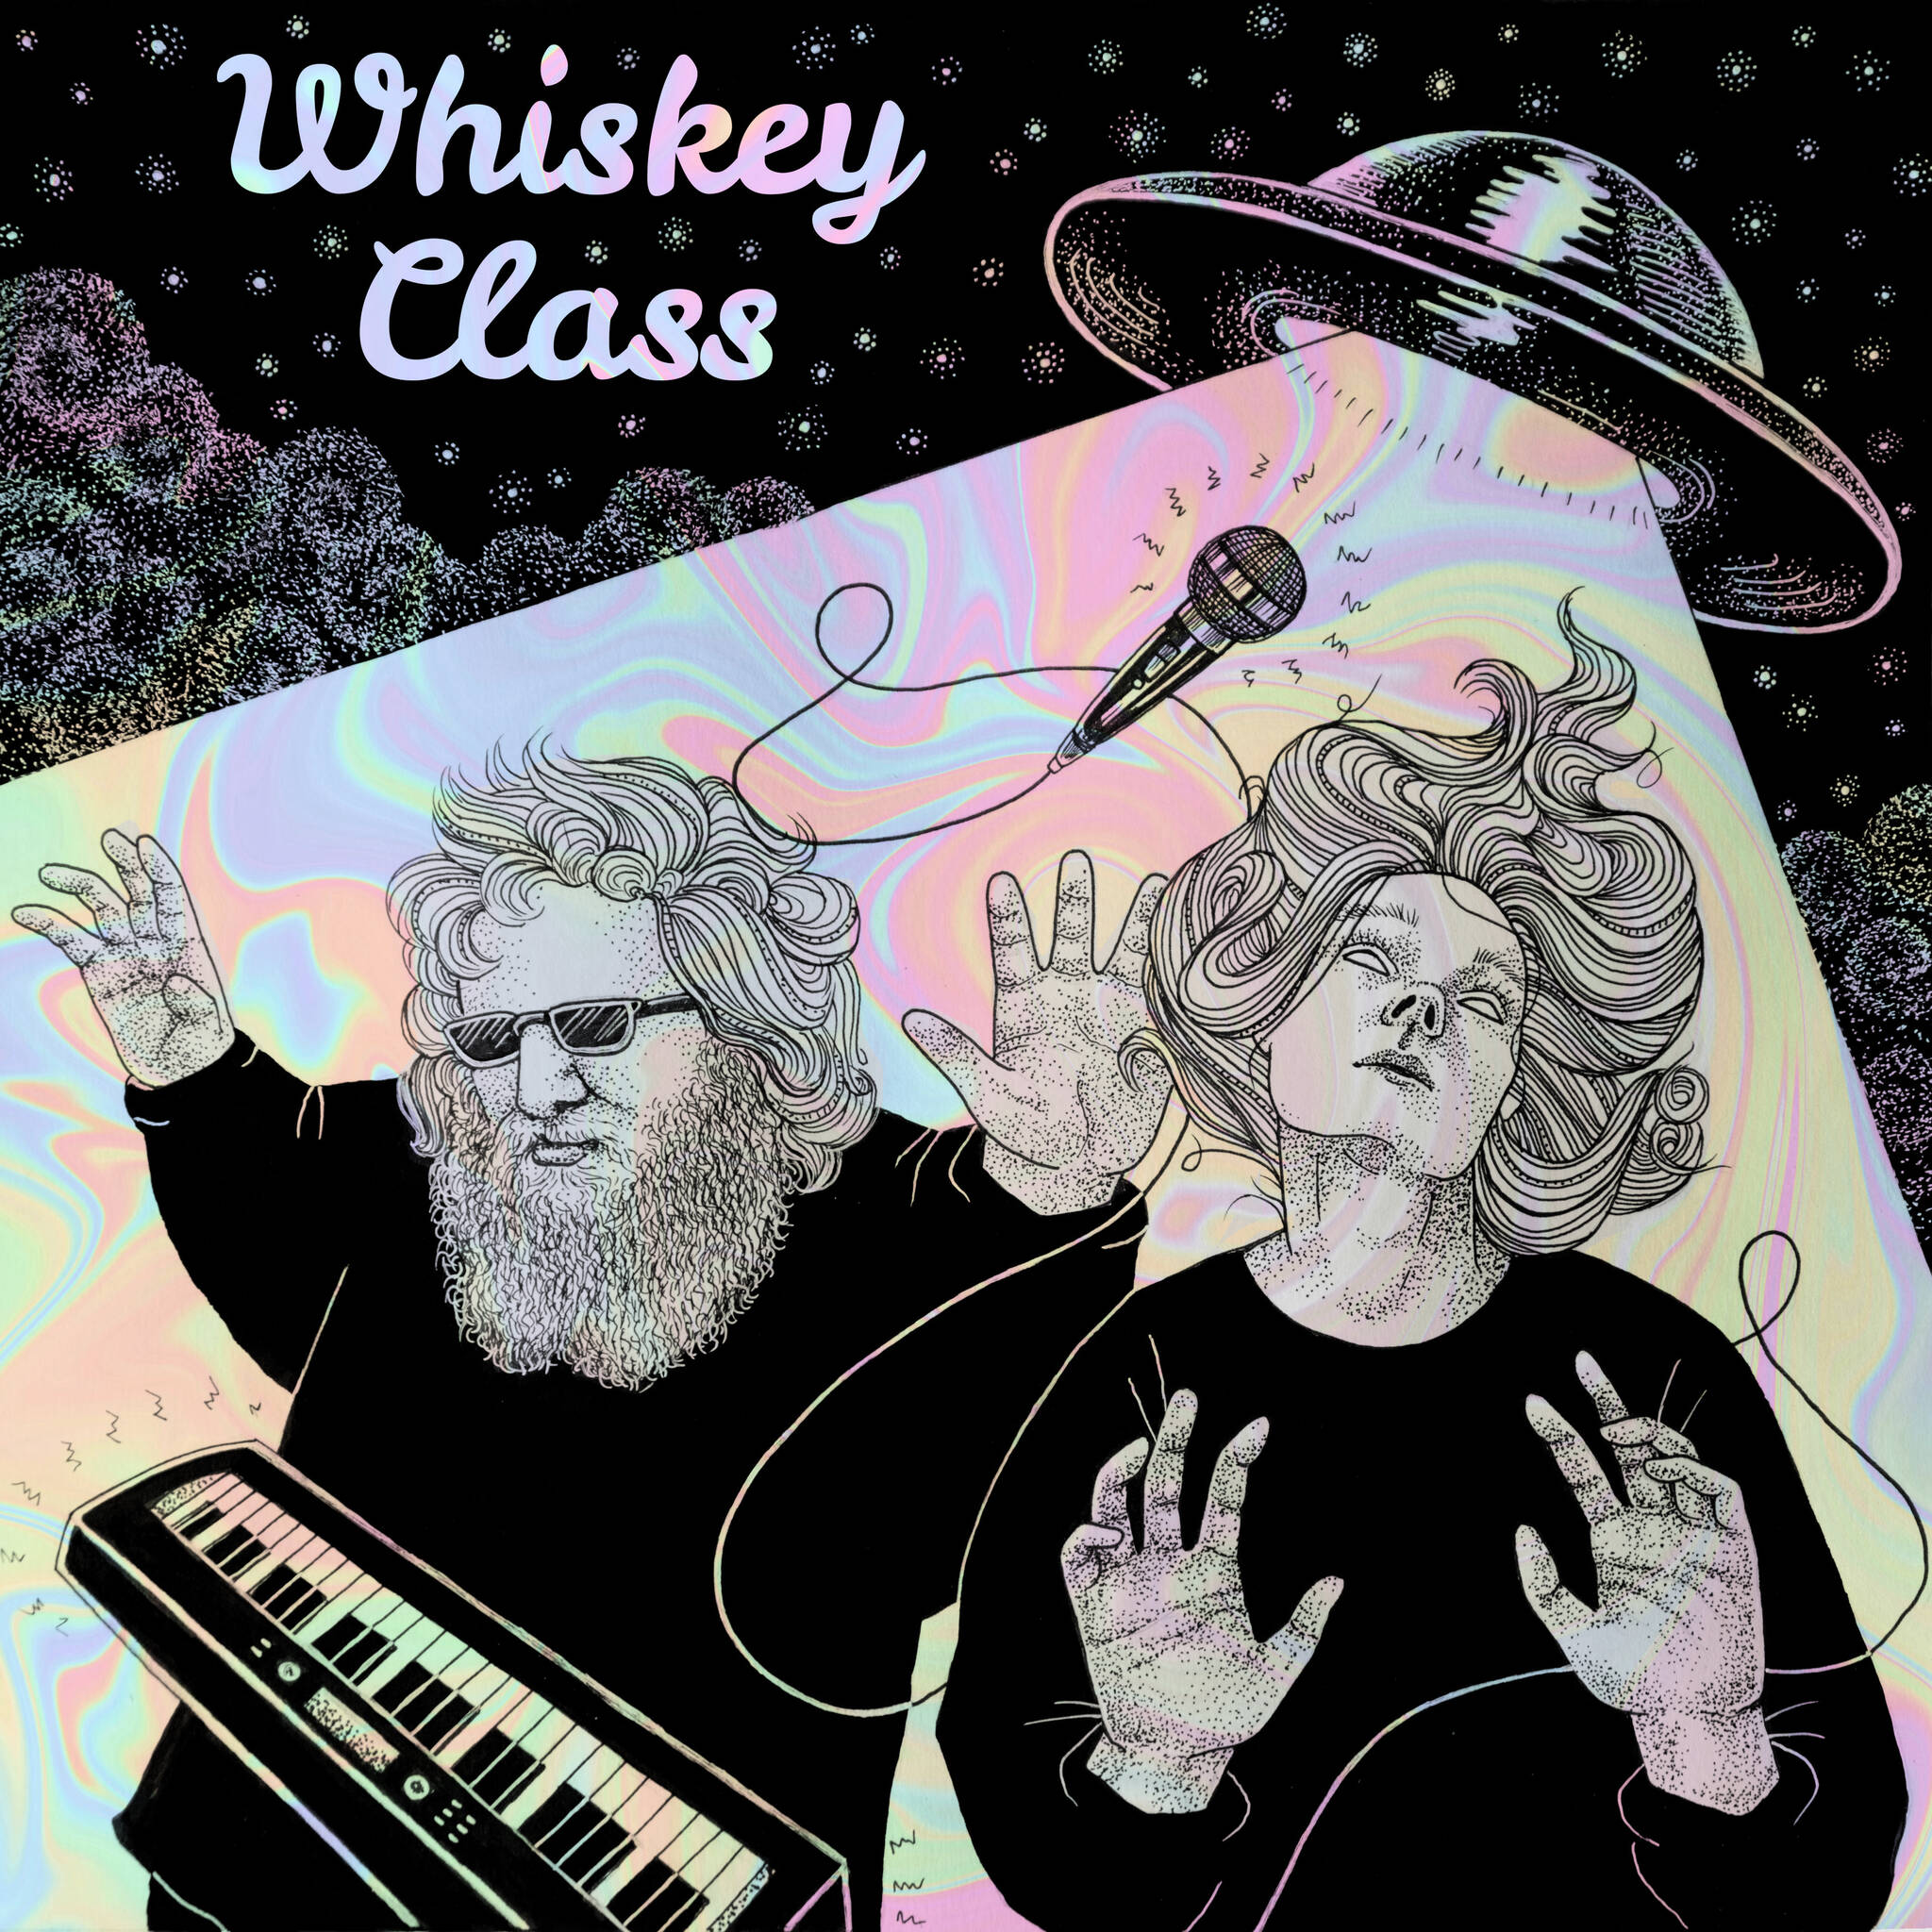 Courtesy Photo 
This photo shows the album cover for Whiskey Class’ new self-titled EP being released on vinyl. The album artwork was done by Kelsey Lovig.